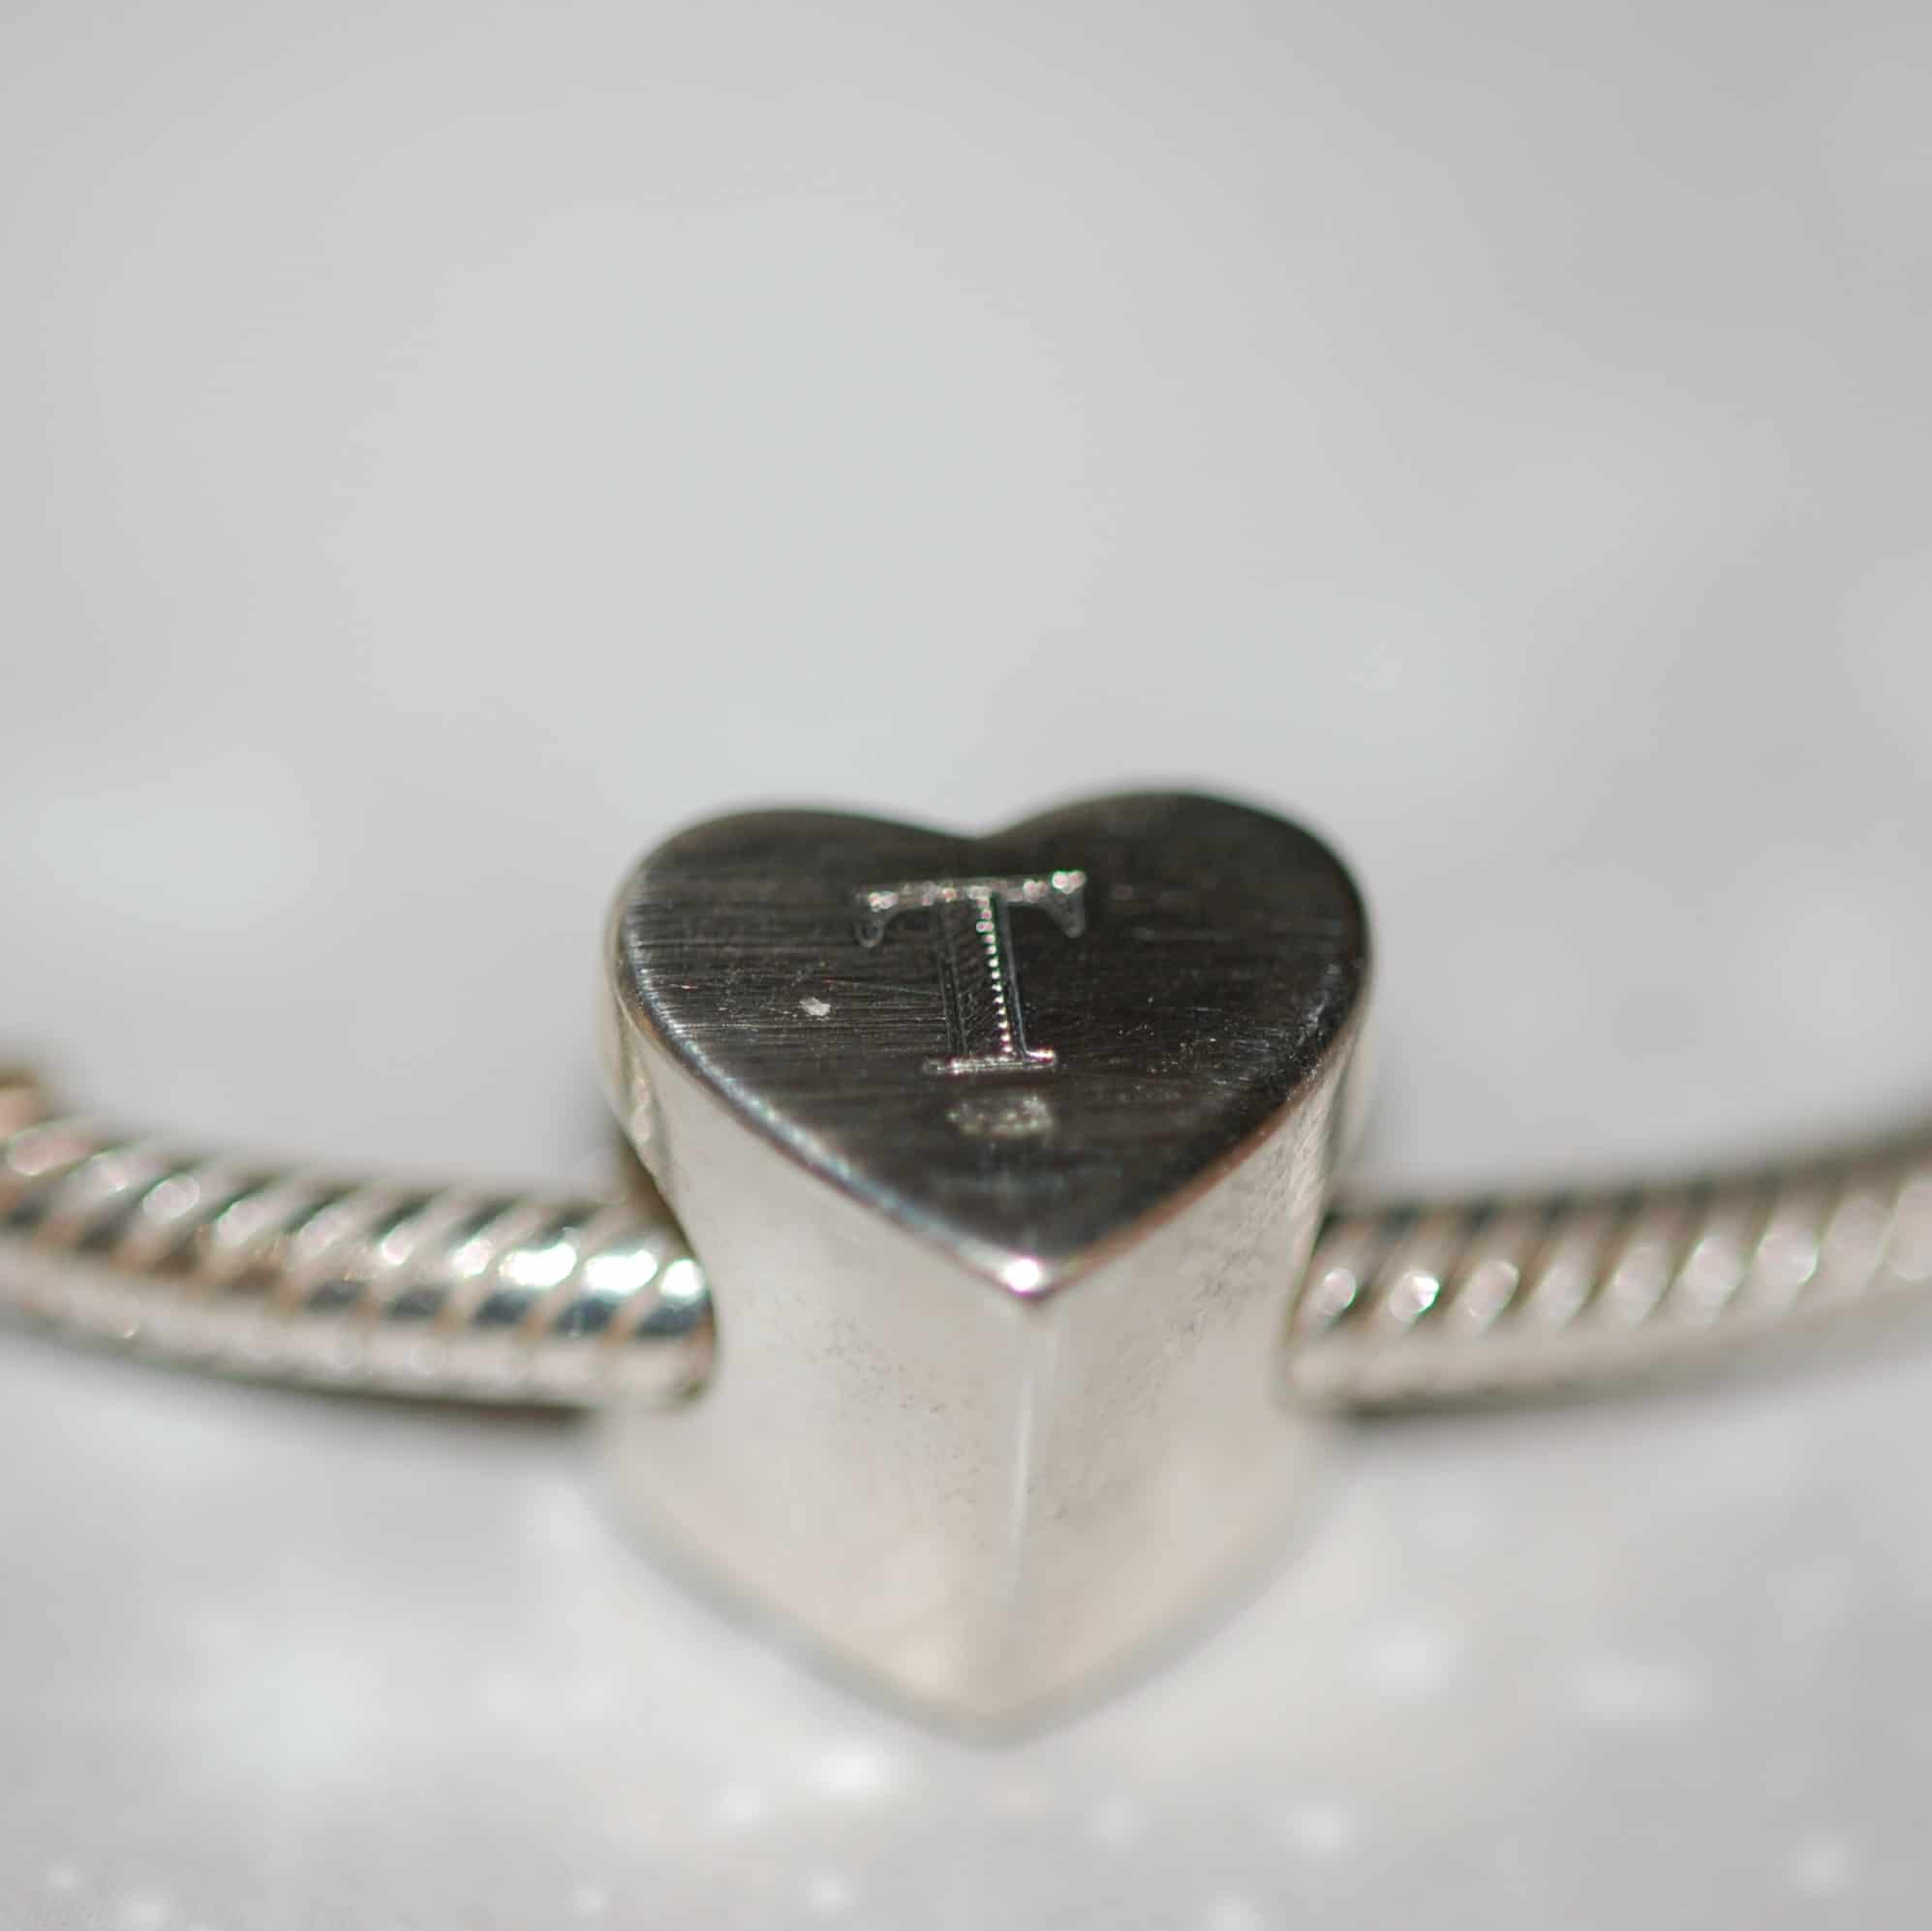 Initial engraved on the back of silver heart charm bead with pet fur or cremation ashes